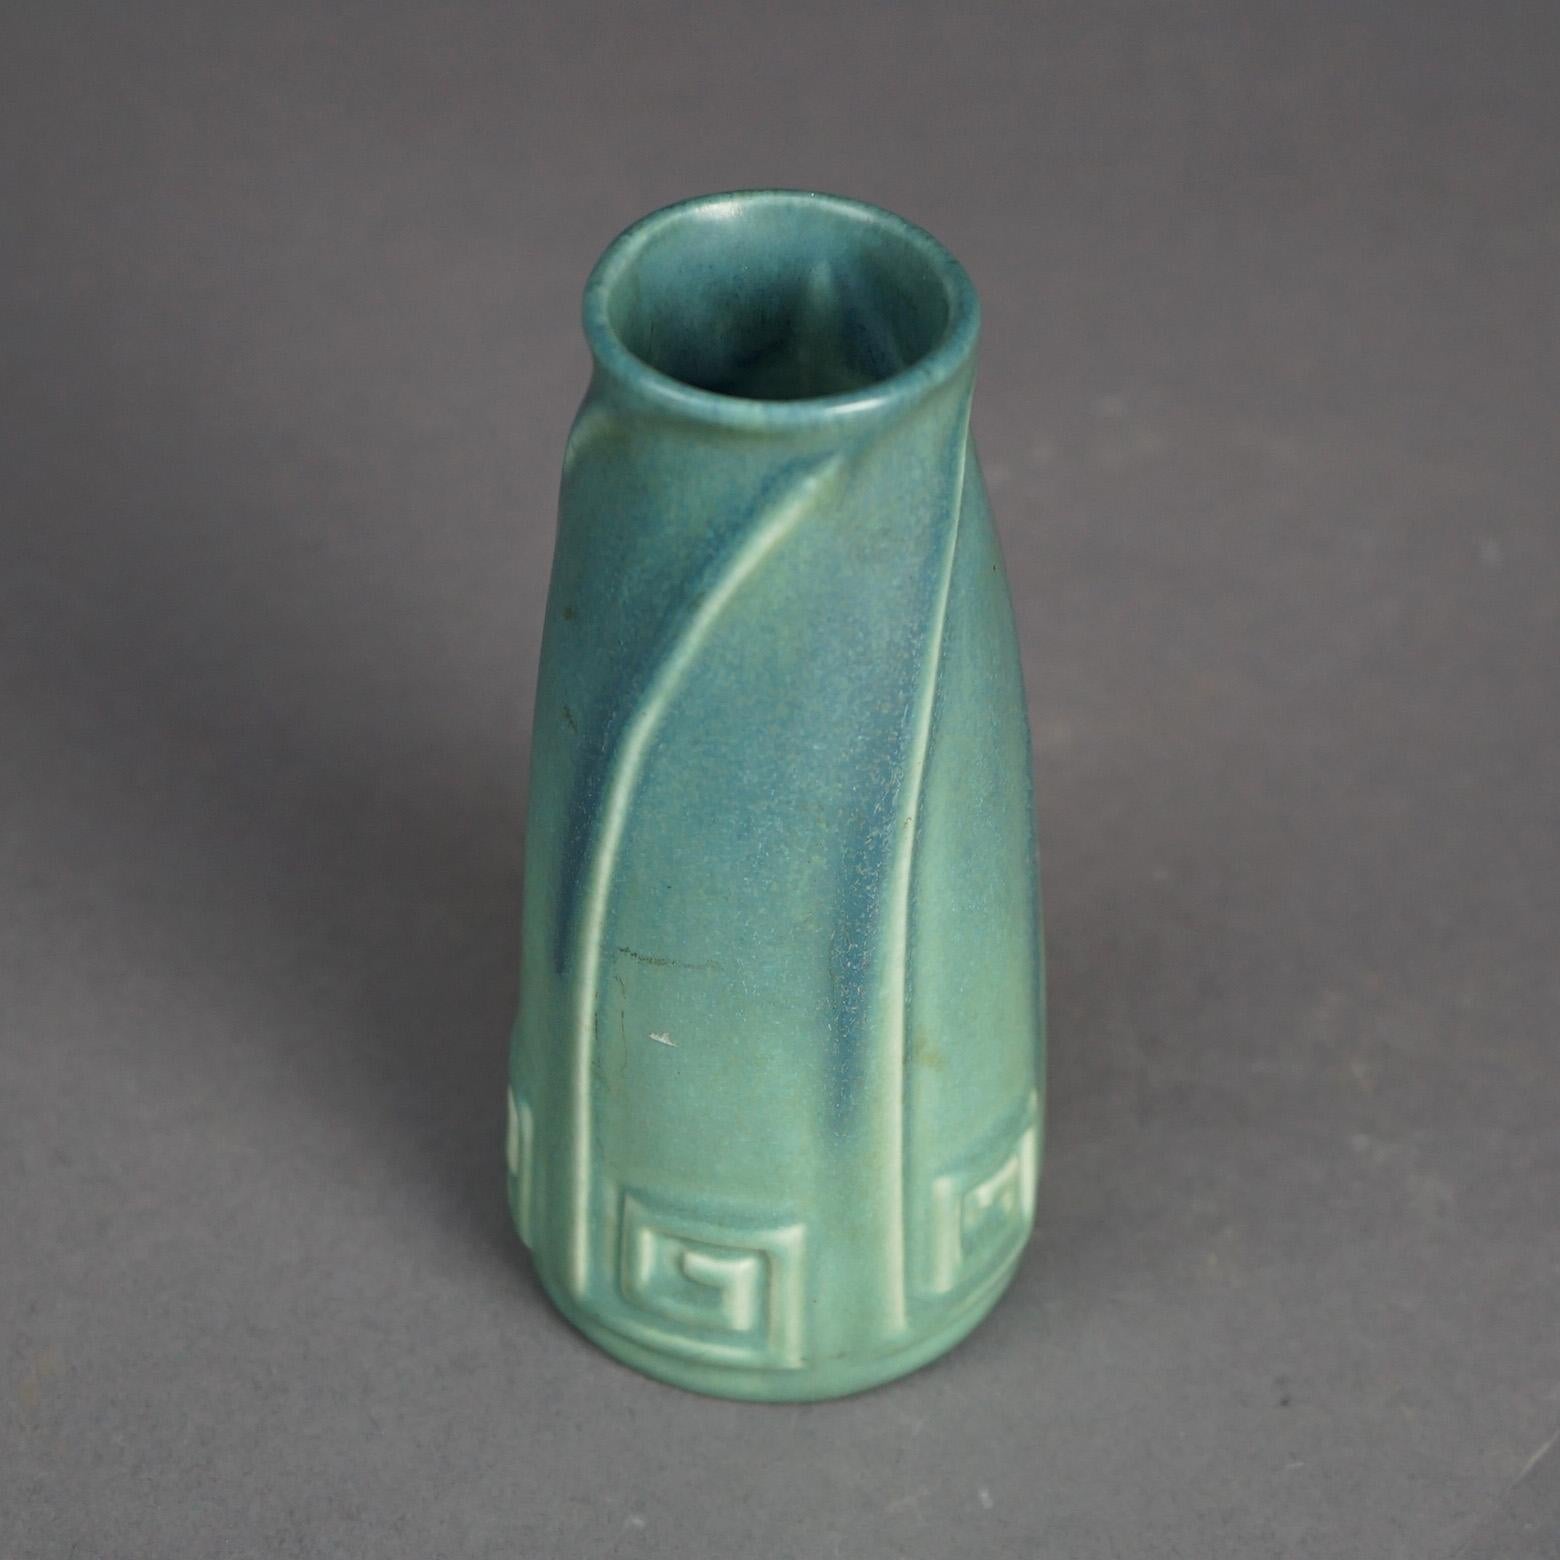 An antique Arts and Crafts vase by Rookwood offers matt glazed art pottery construction with stylized Greek Key and swirl elements, signed on base as photographed, c1923

Measures- 6''H x 2.75''W x 2.75''D